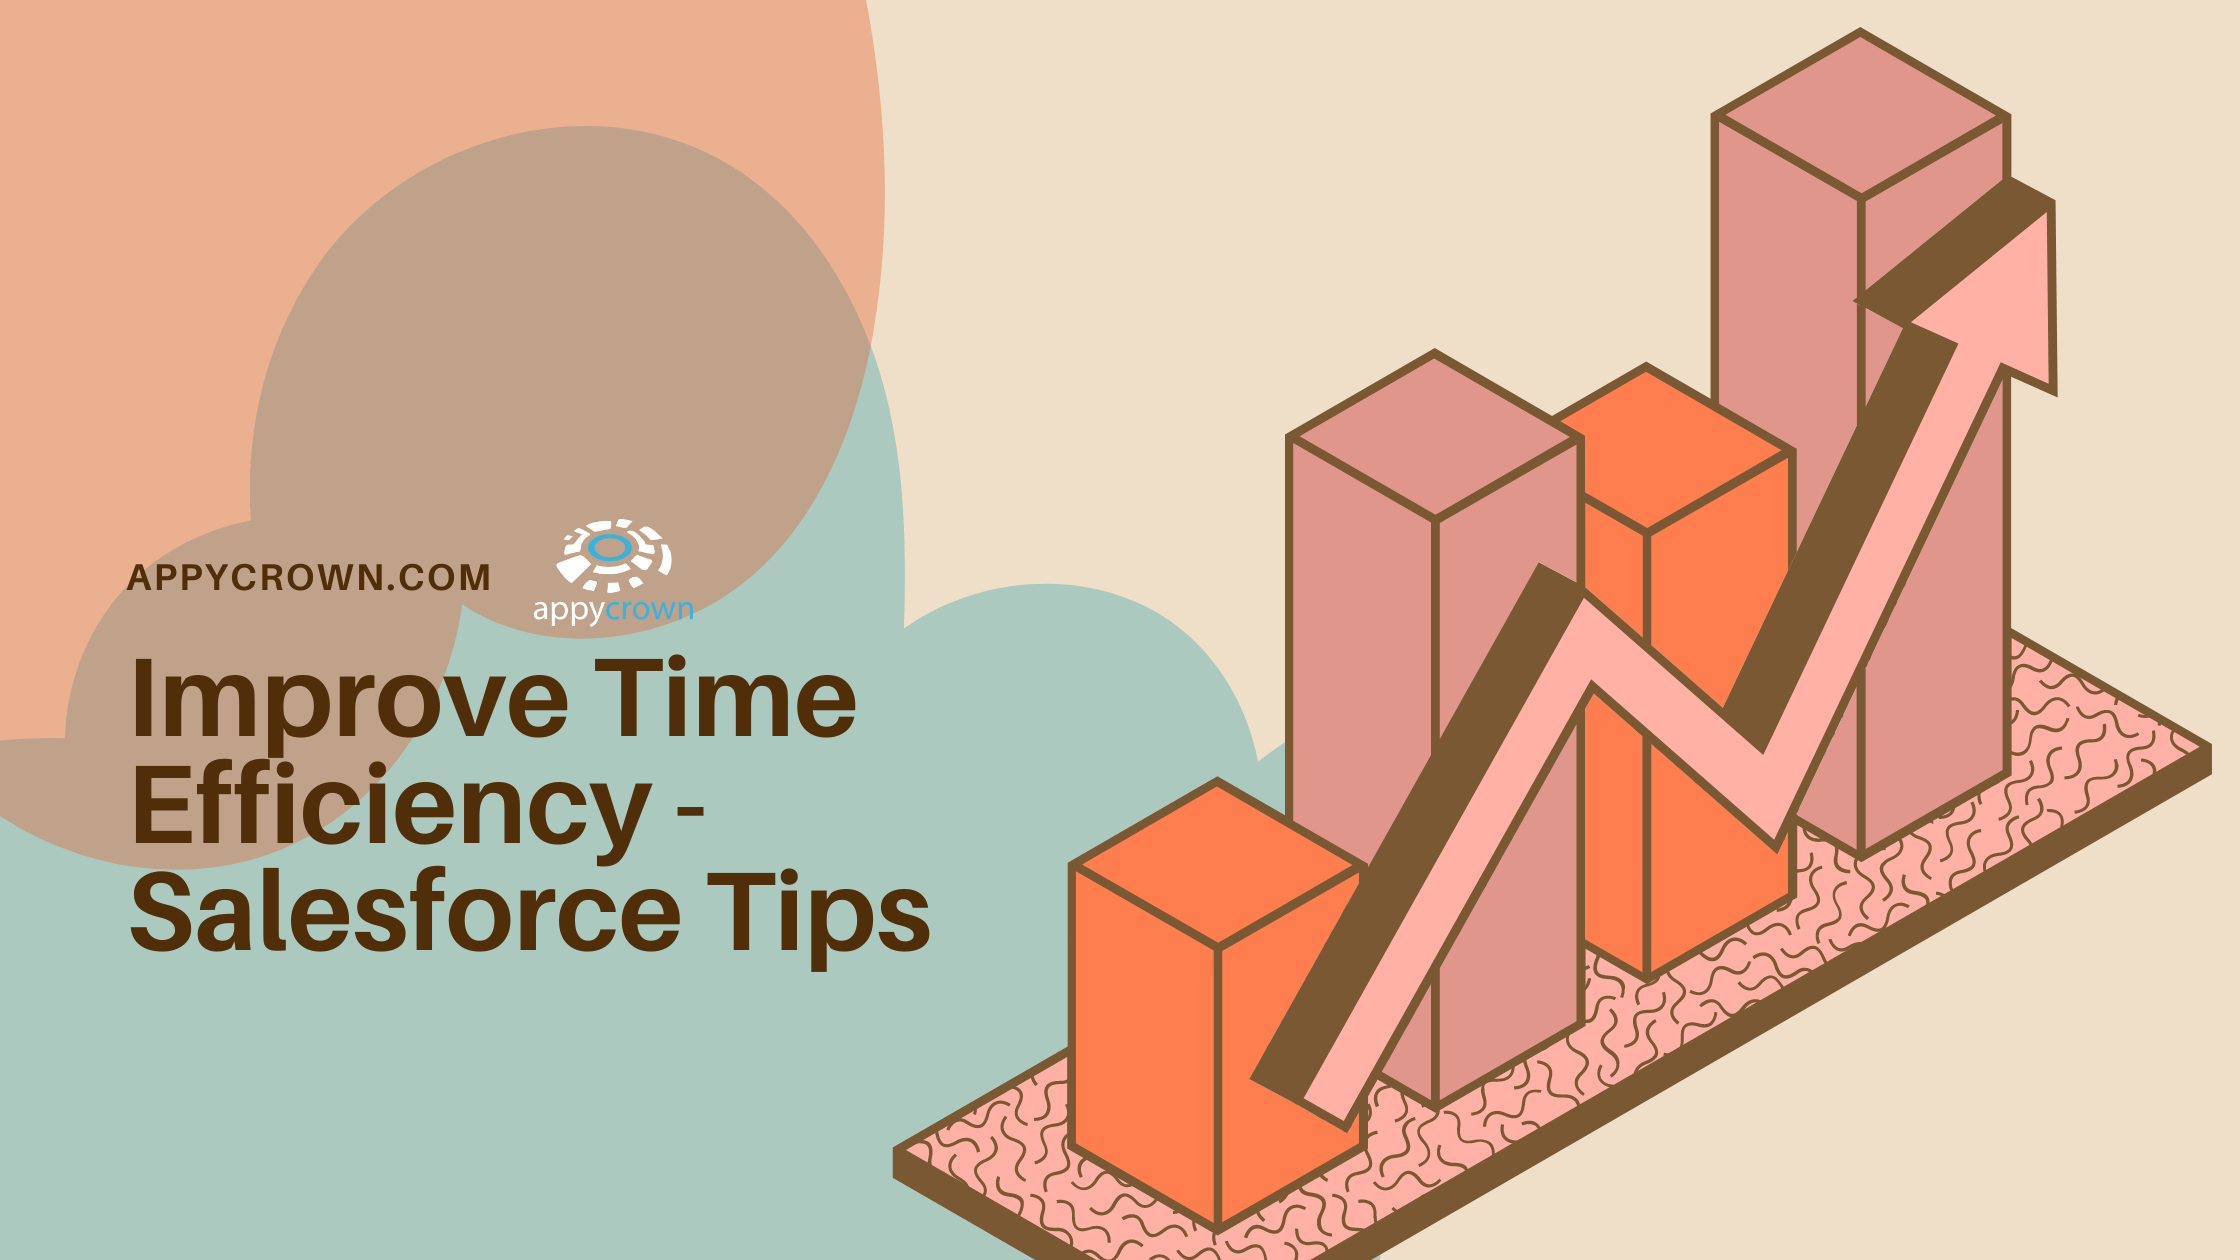 Salesforce Tips for Ultimate Time Efficiency